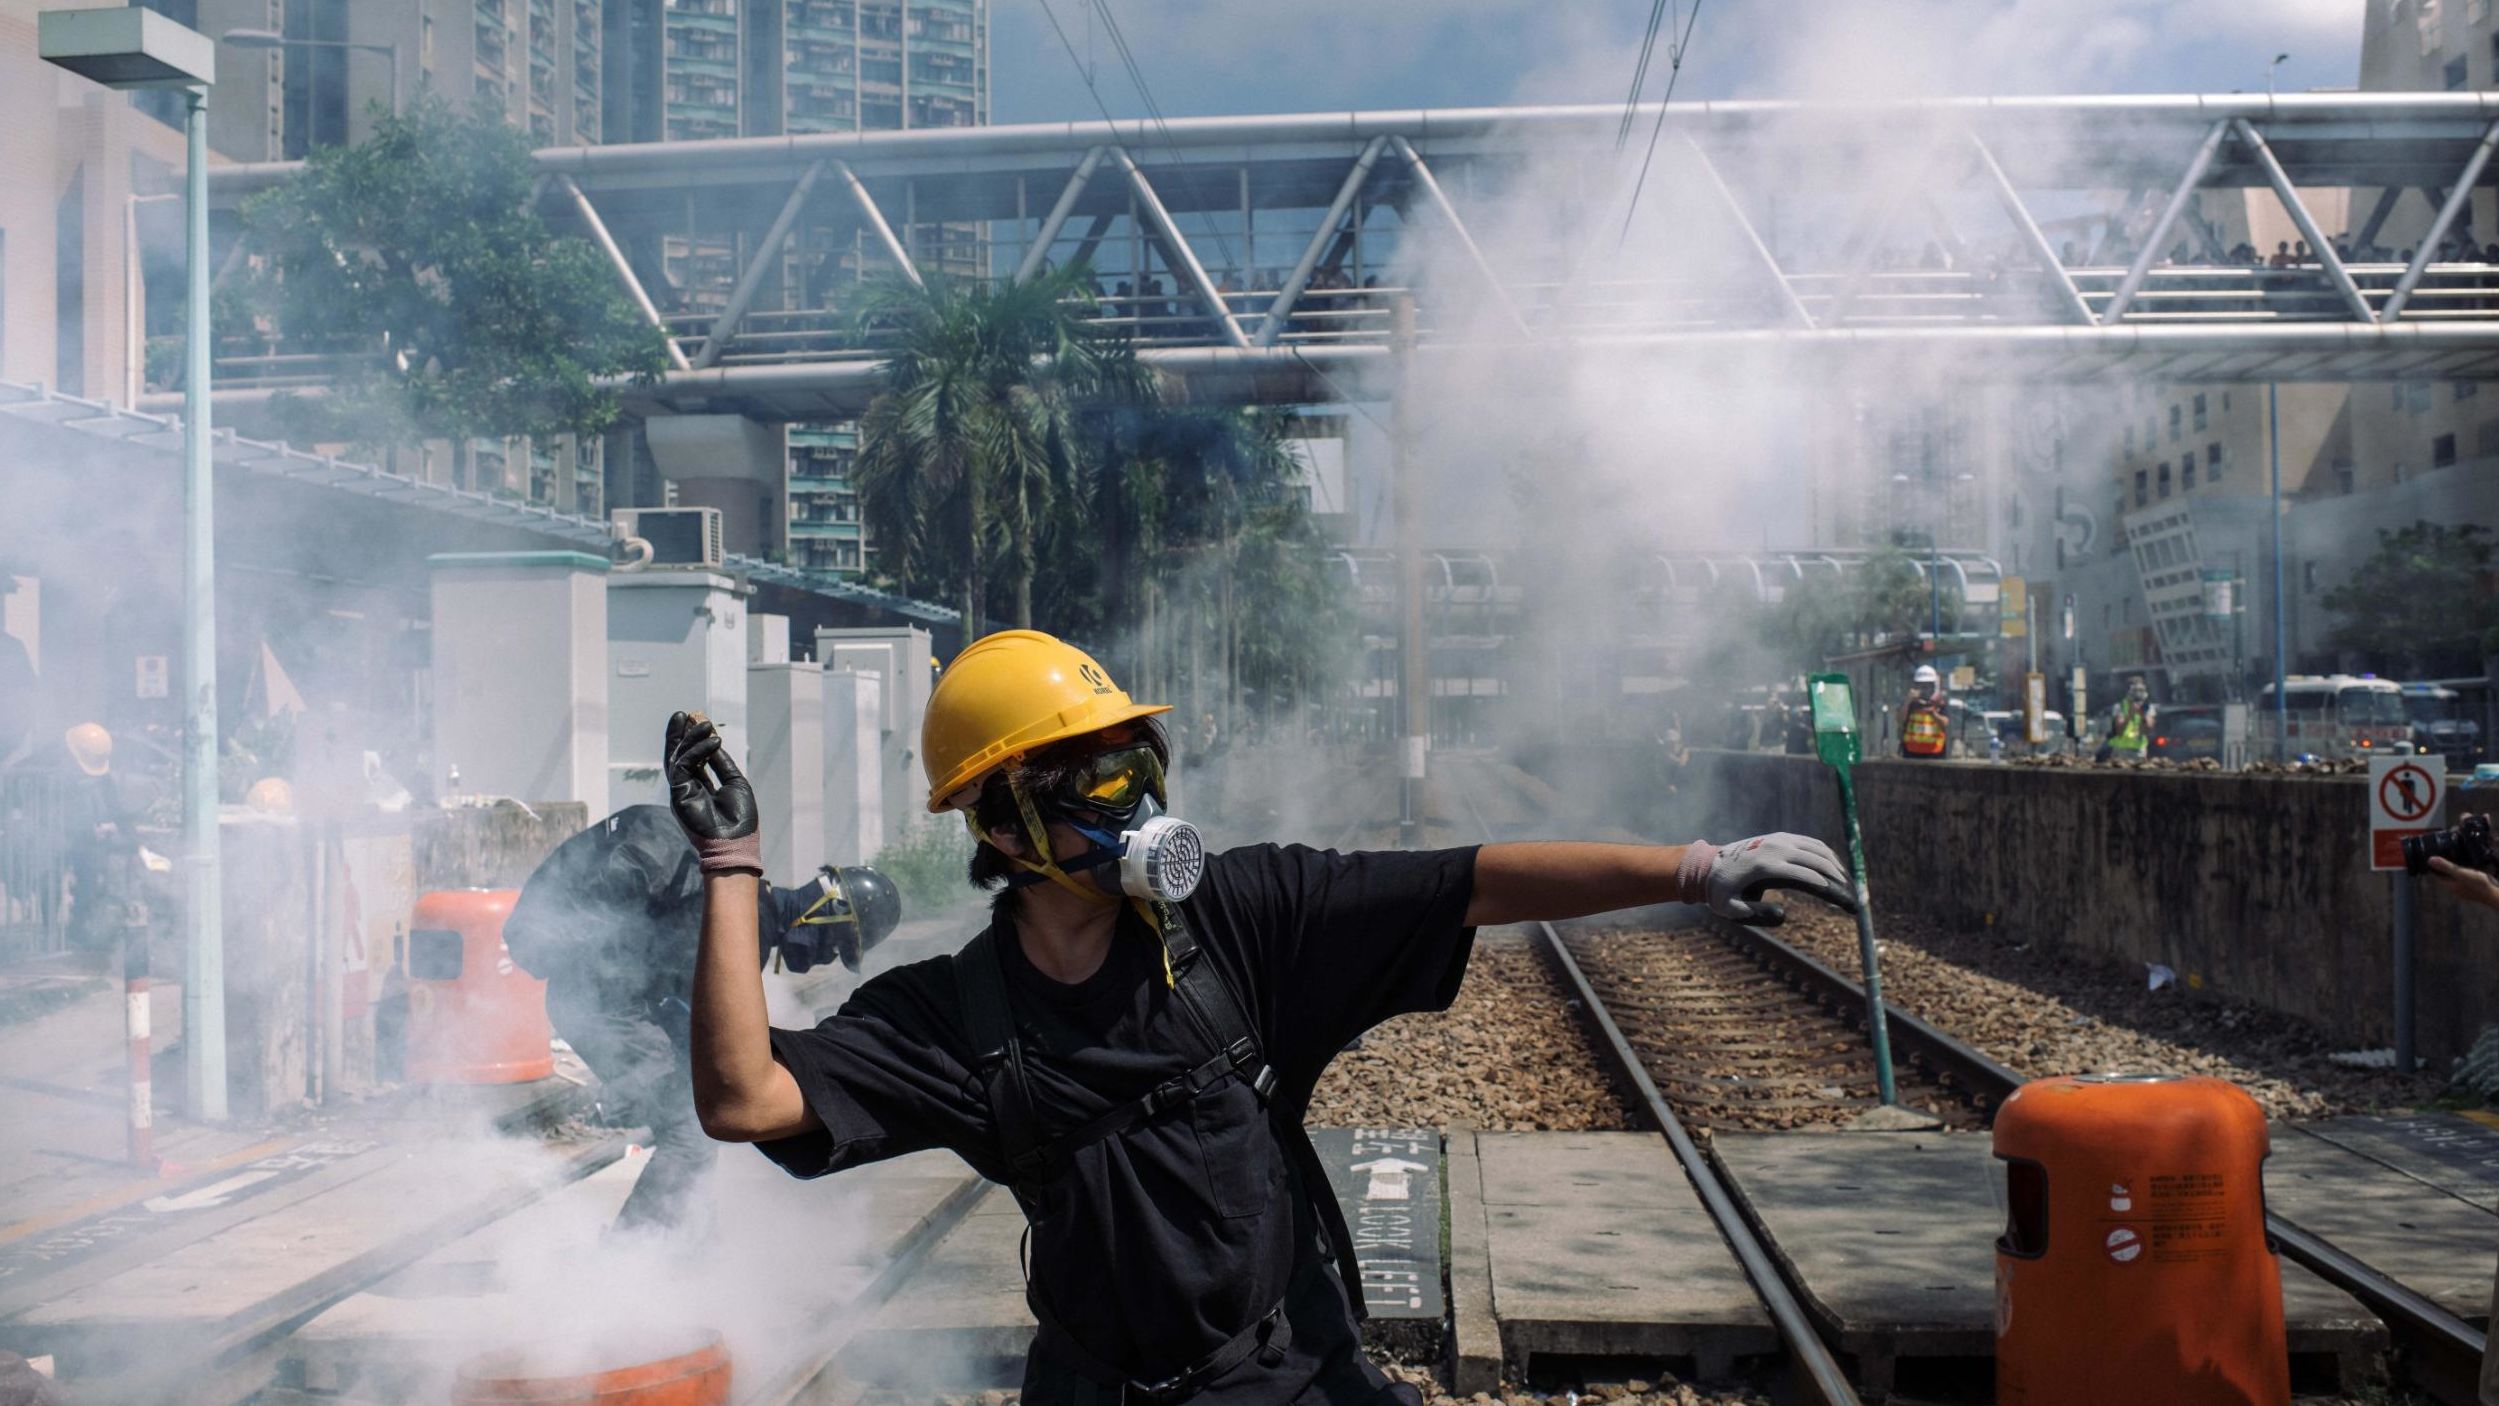  A protester throws a stone towards police outside Tin Shui Wai police station during a protest on August 5, 2019 in Hong Kong.